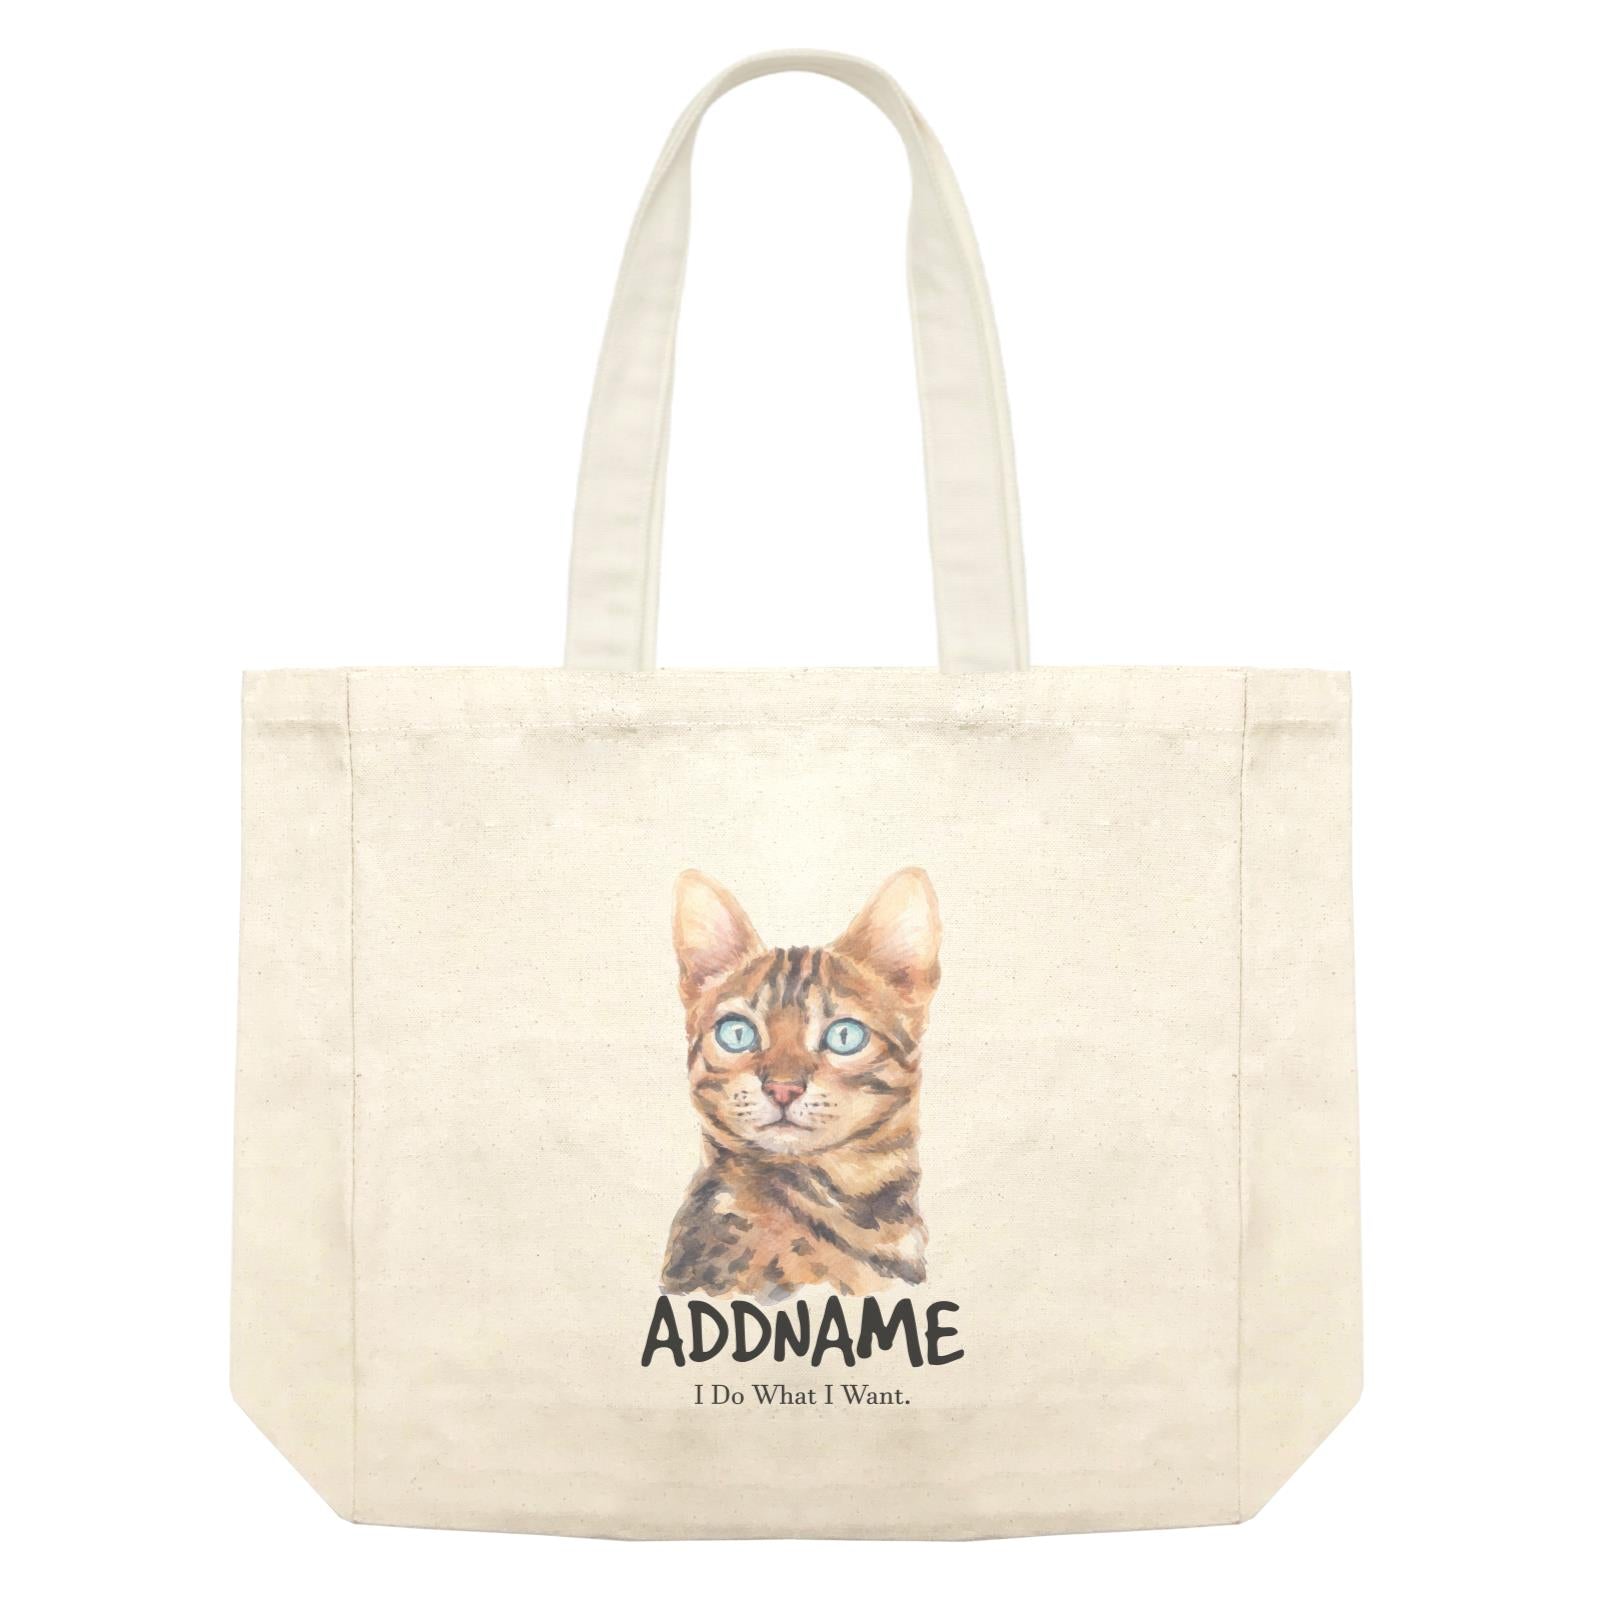 Watercolor Cat Bengal Cat I Do What I Want Addname Shopping Bag